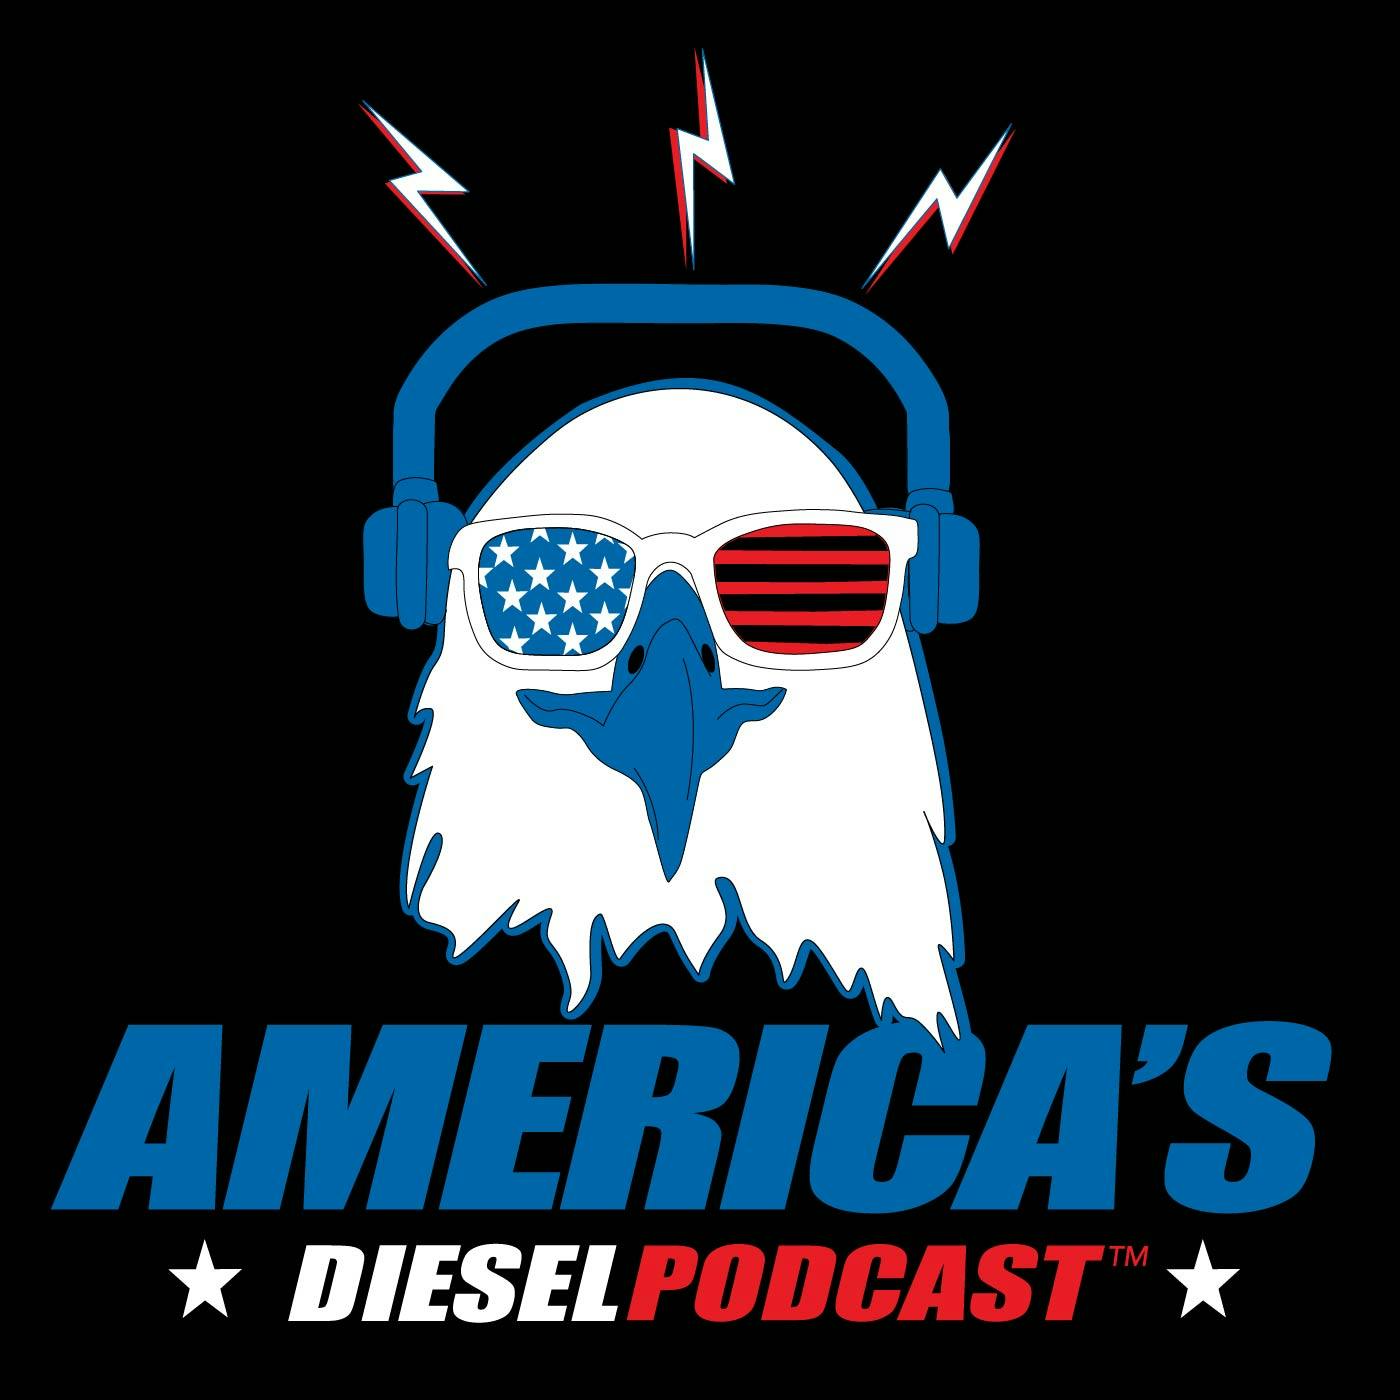 Ep. 188 S475 Turbo - The BEST Bang For The Buck On Your Diesel